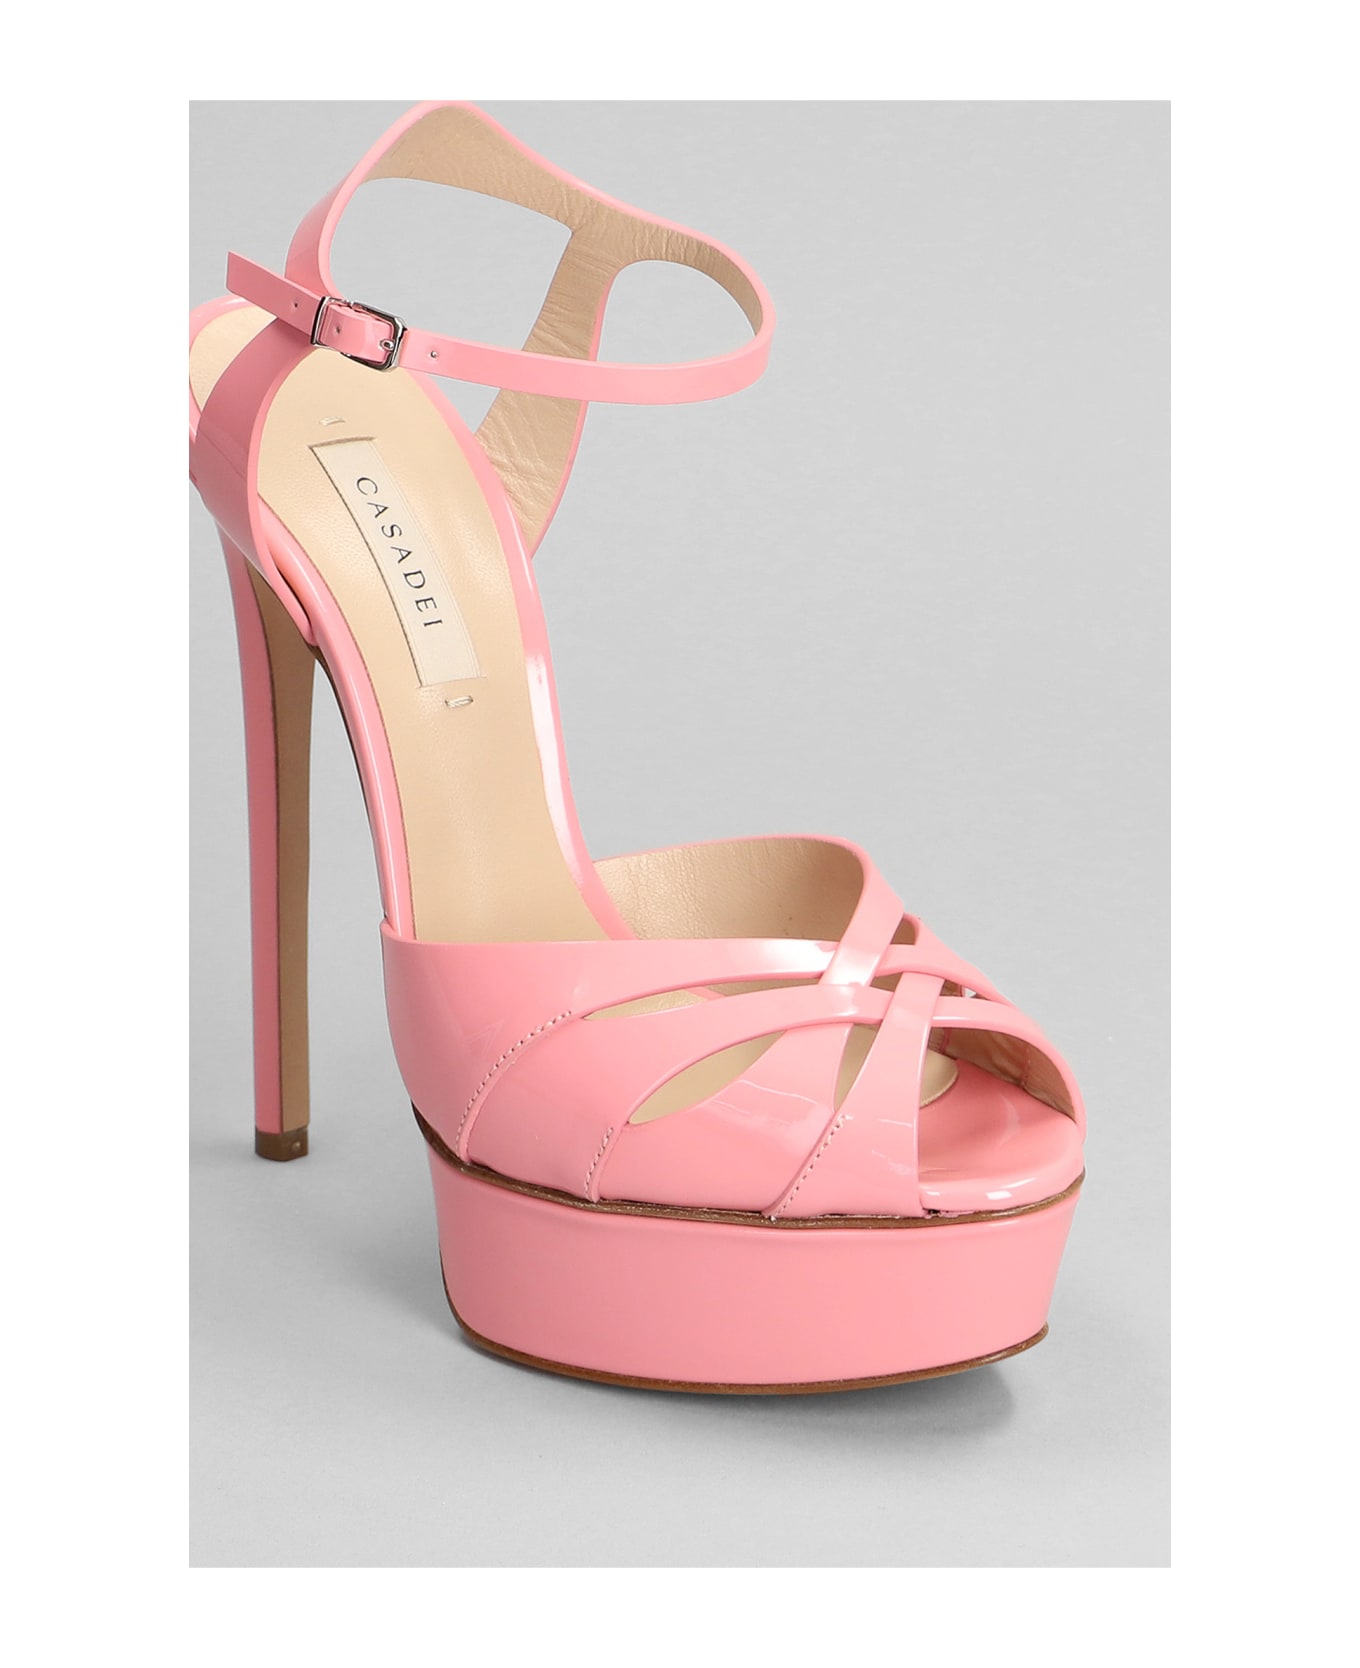 Casadei Sandals In Rose-pink Patent Leather - rose-pink